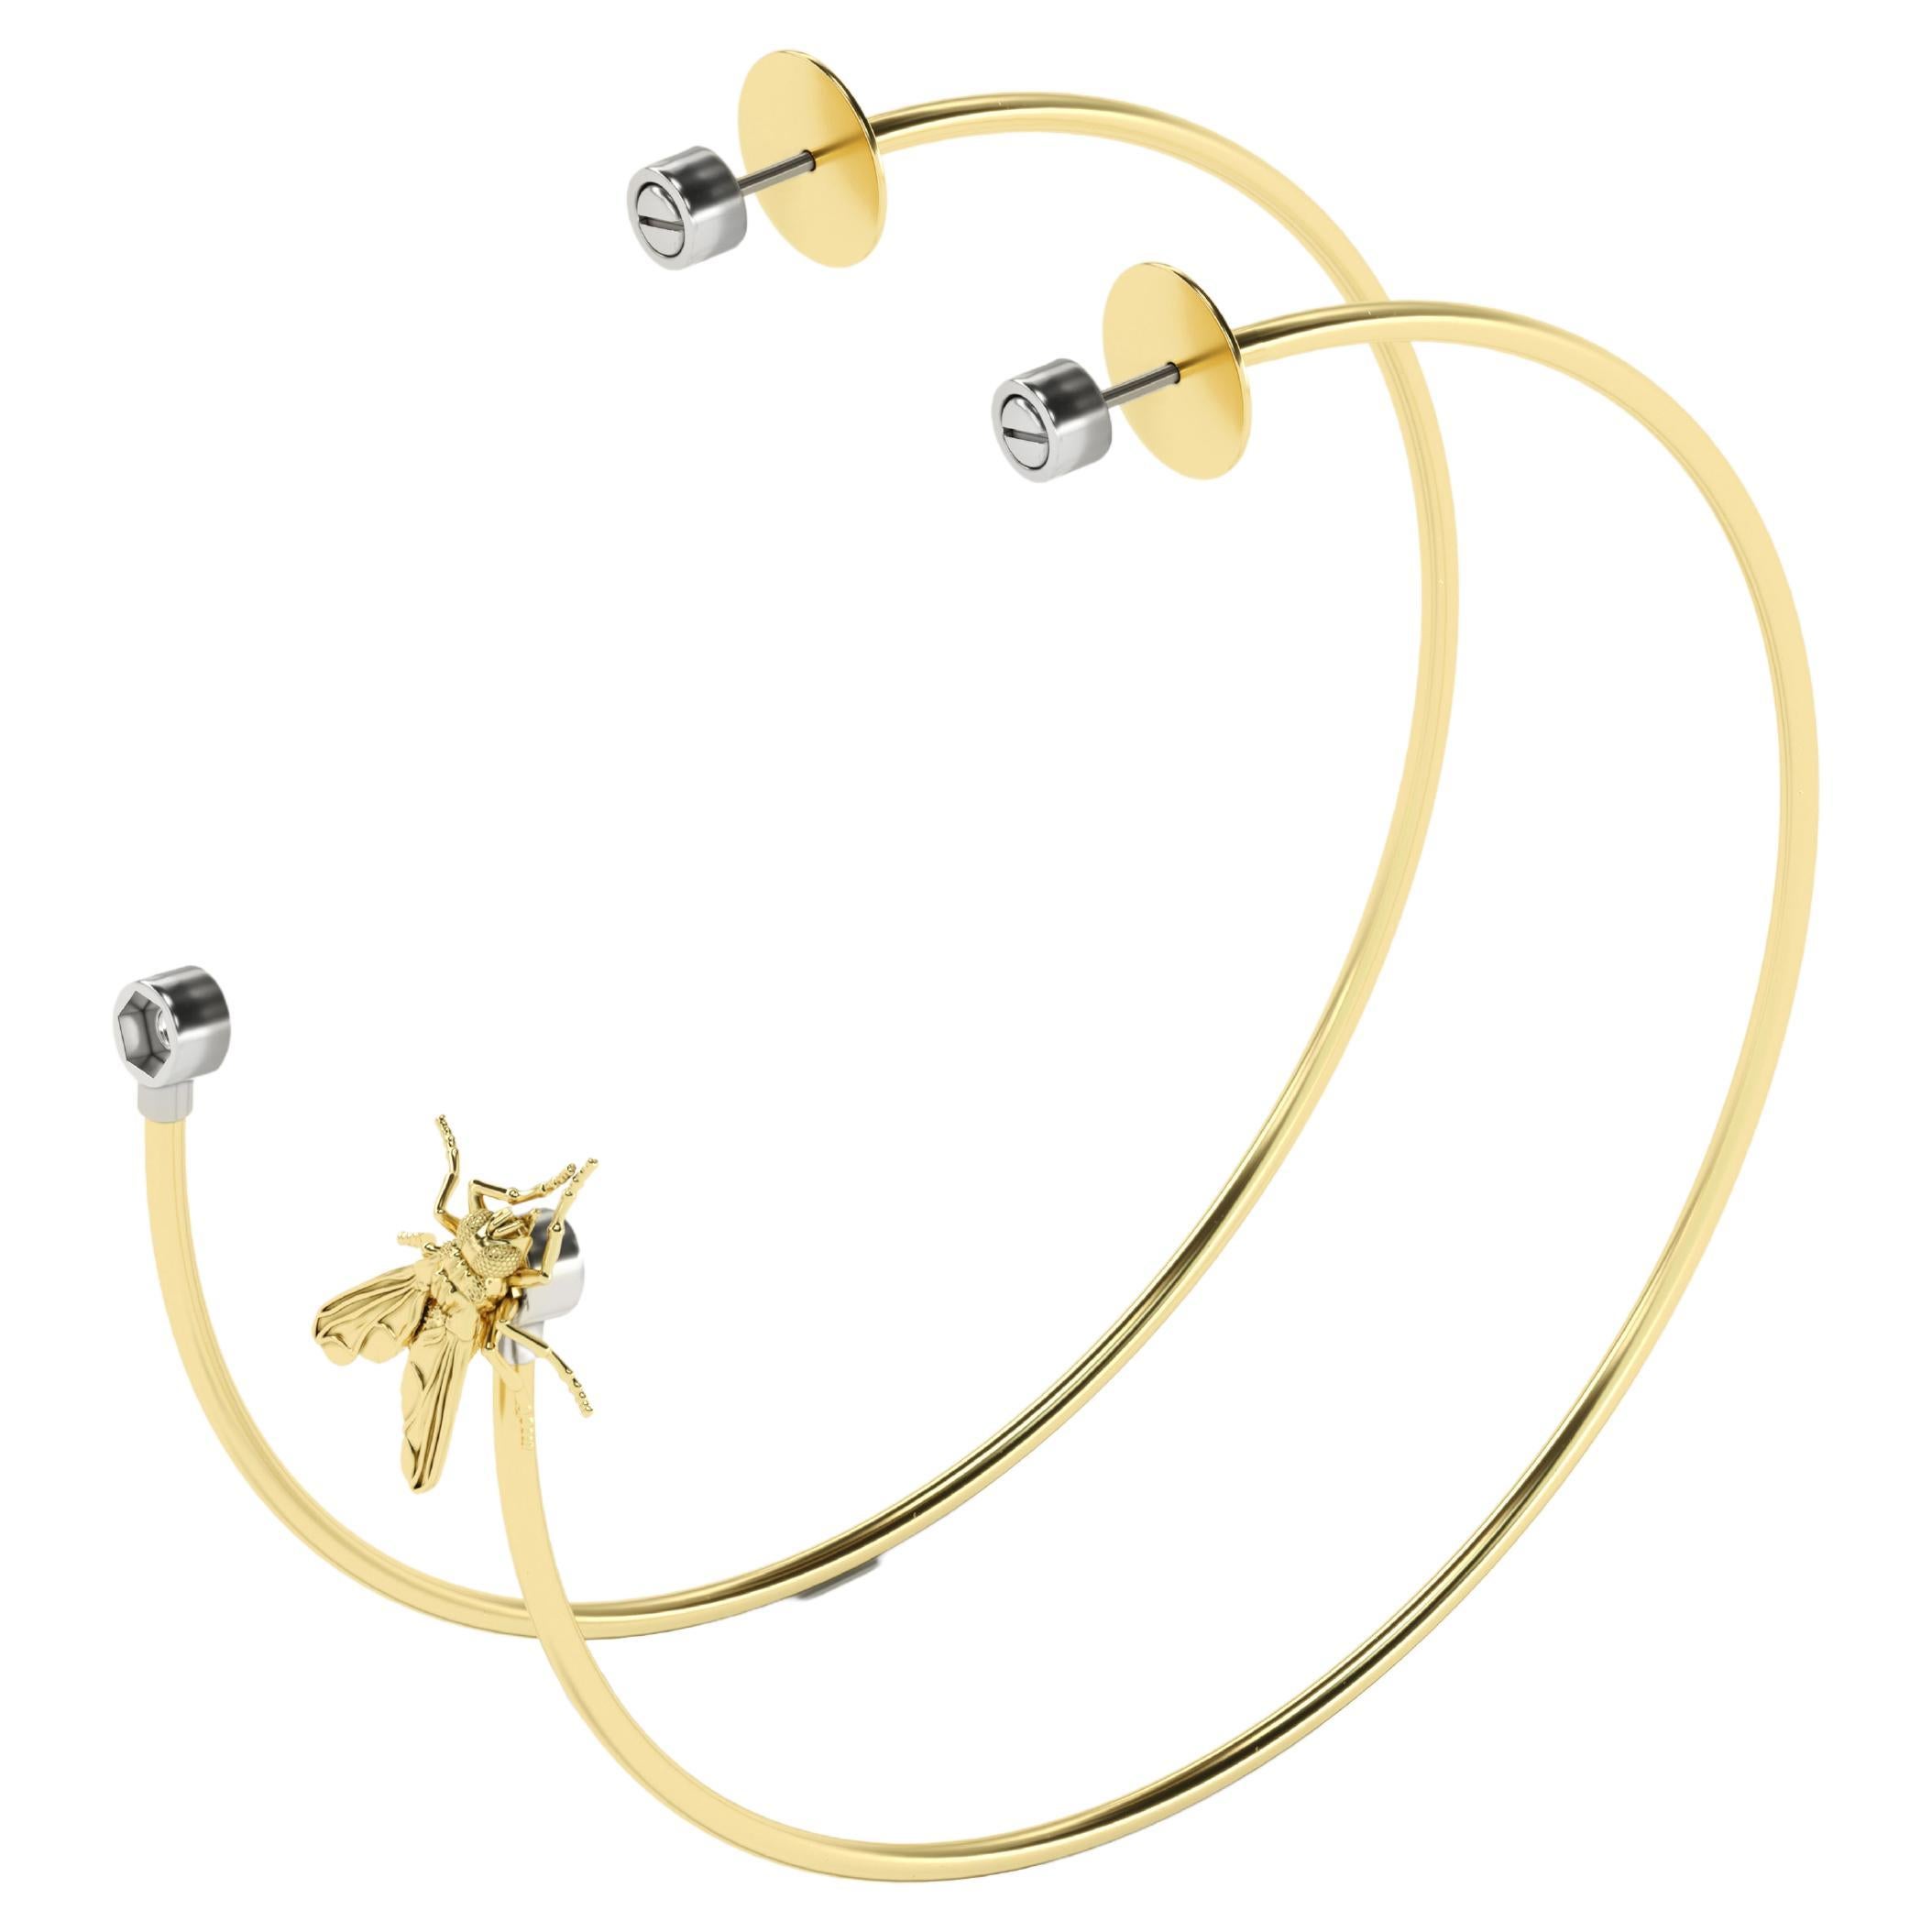 Pair of yellow gold hoop earrings with removable Fly, 18K. Animalia fashion